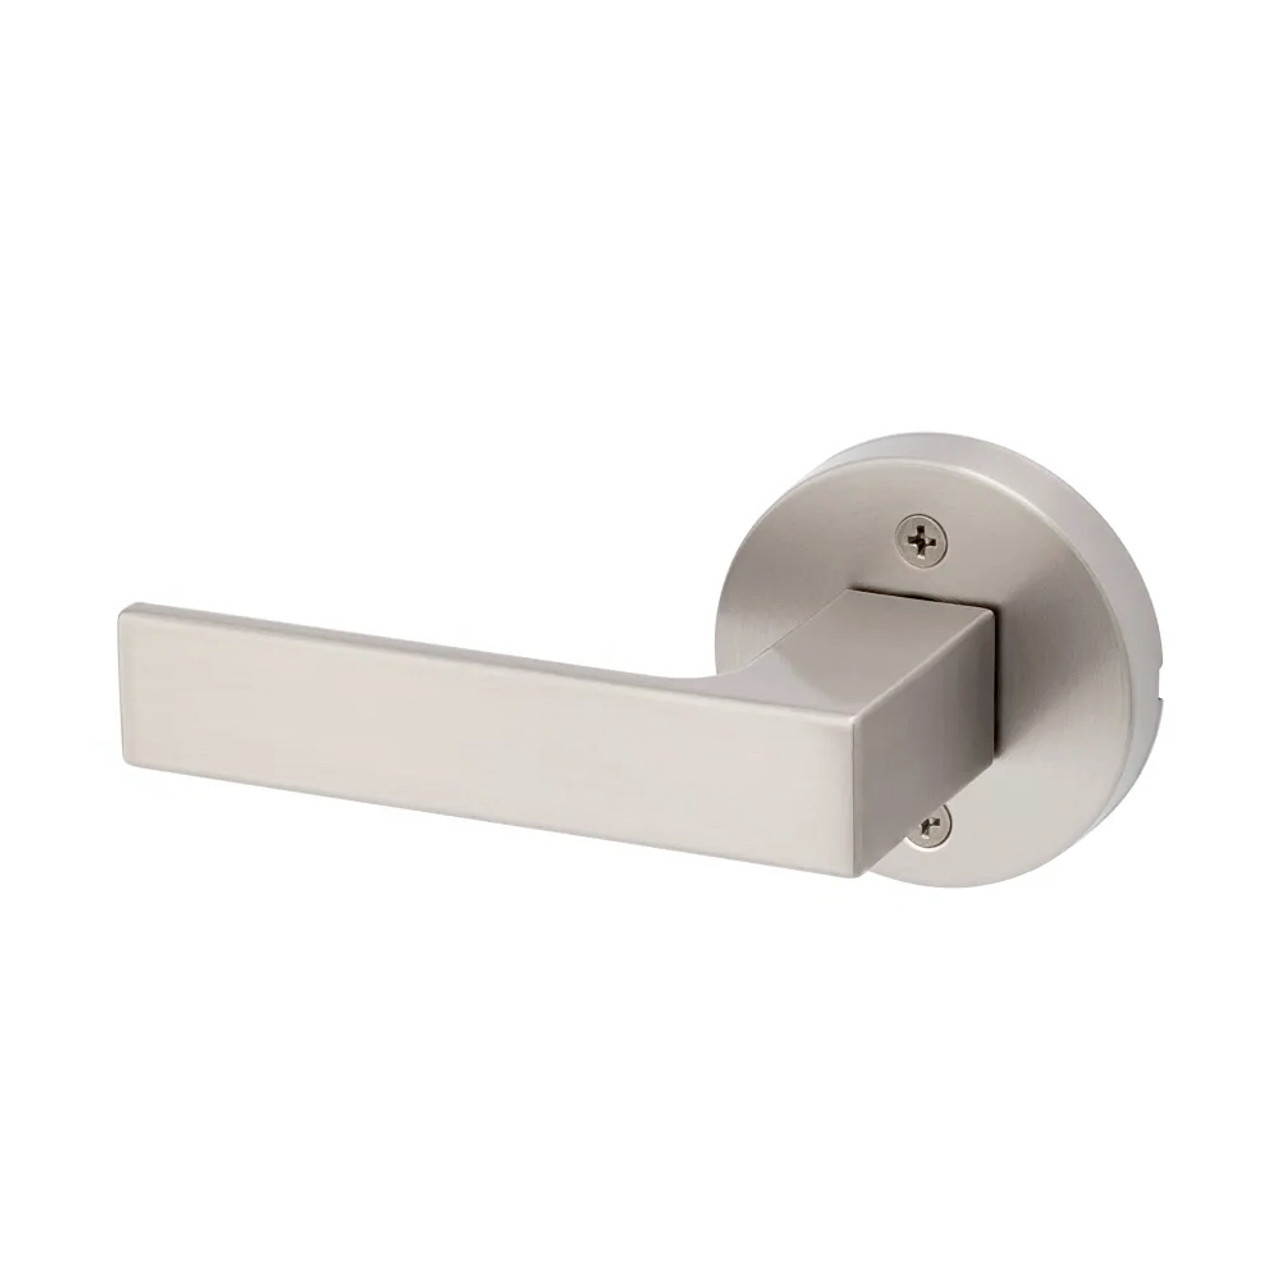 Kwikset 788CHL LH Commonwealth Half-Dummy Left-Handed Lever, Polished Brass by Kwikset - 2